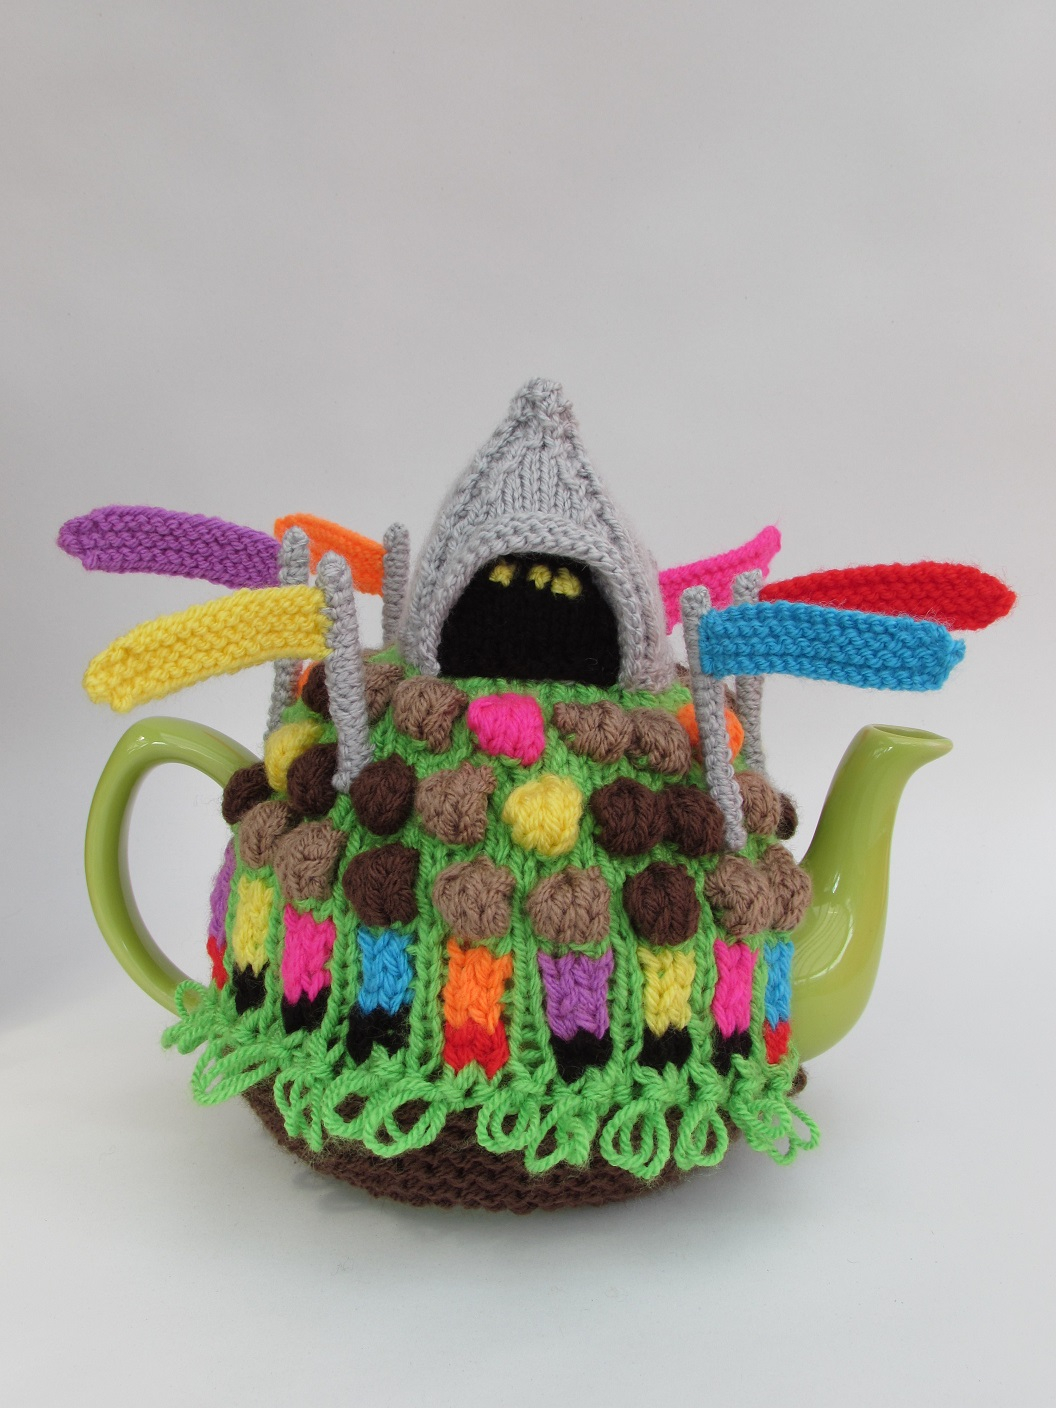 Knitted Tea Cosy Pattern Easy Tea Cosy Knitting Patterns From Tea Cosy Folk Learn How To Knit Our